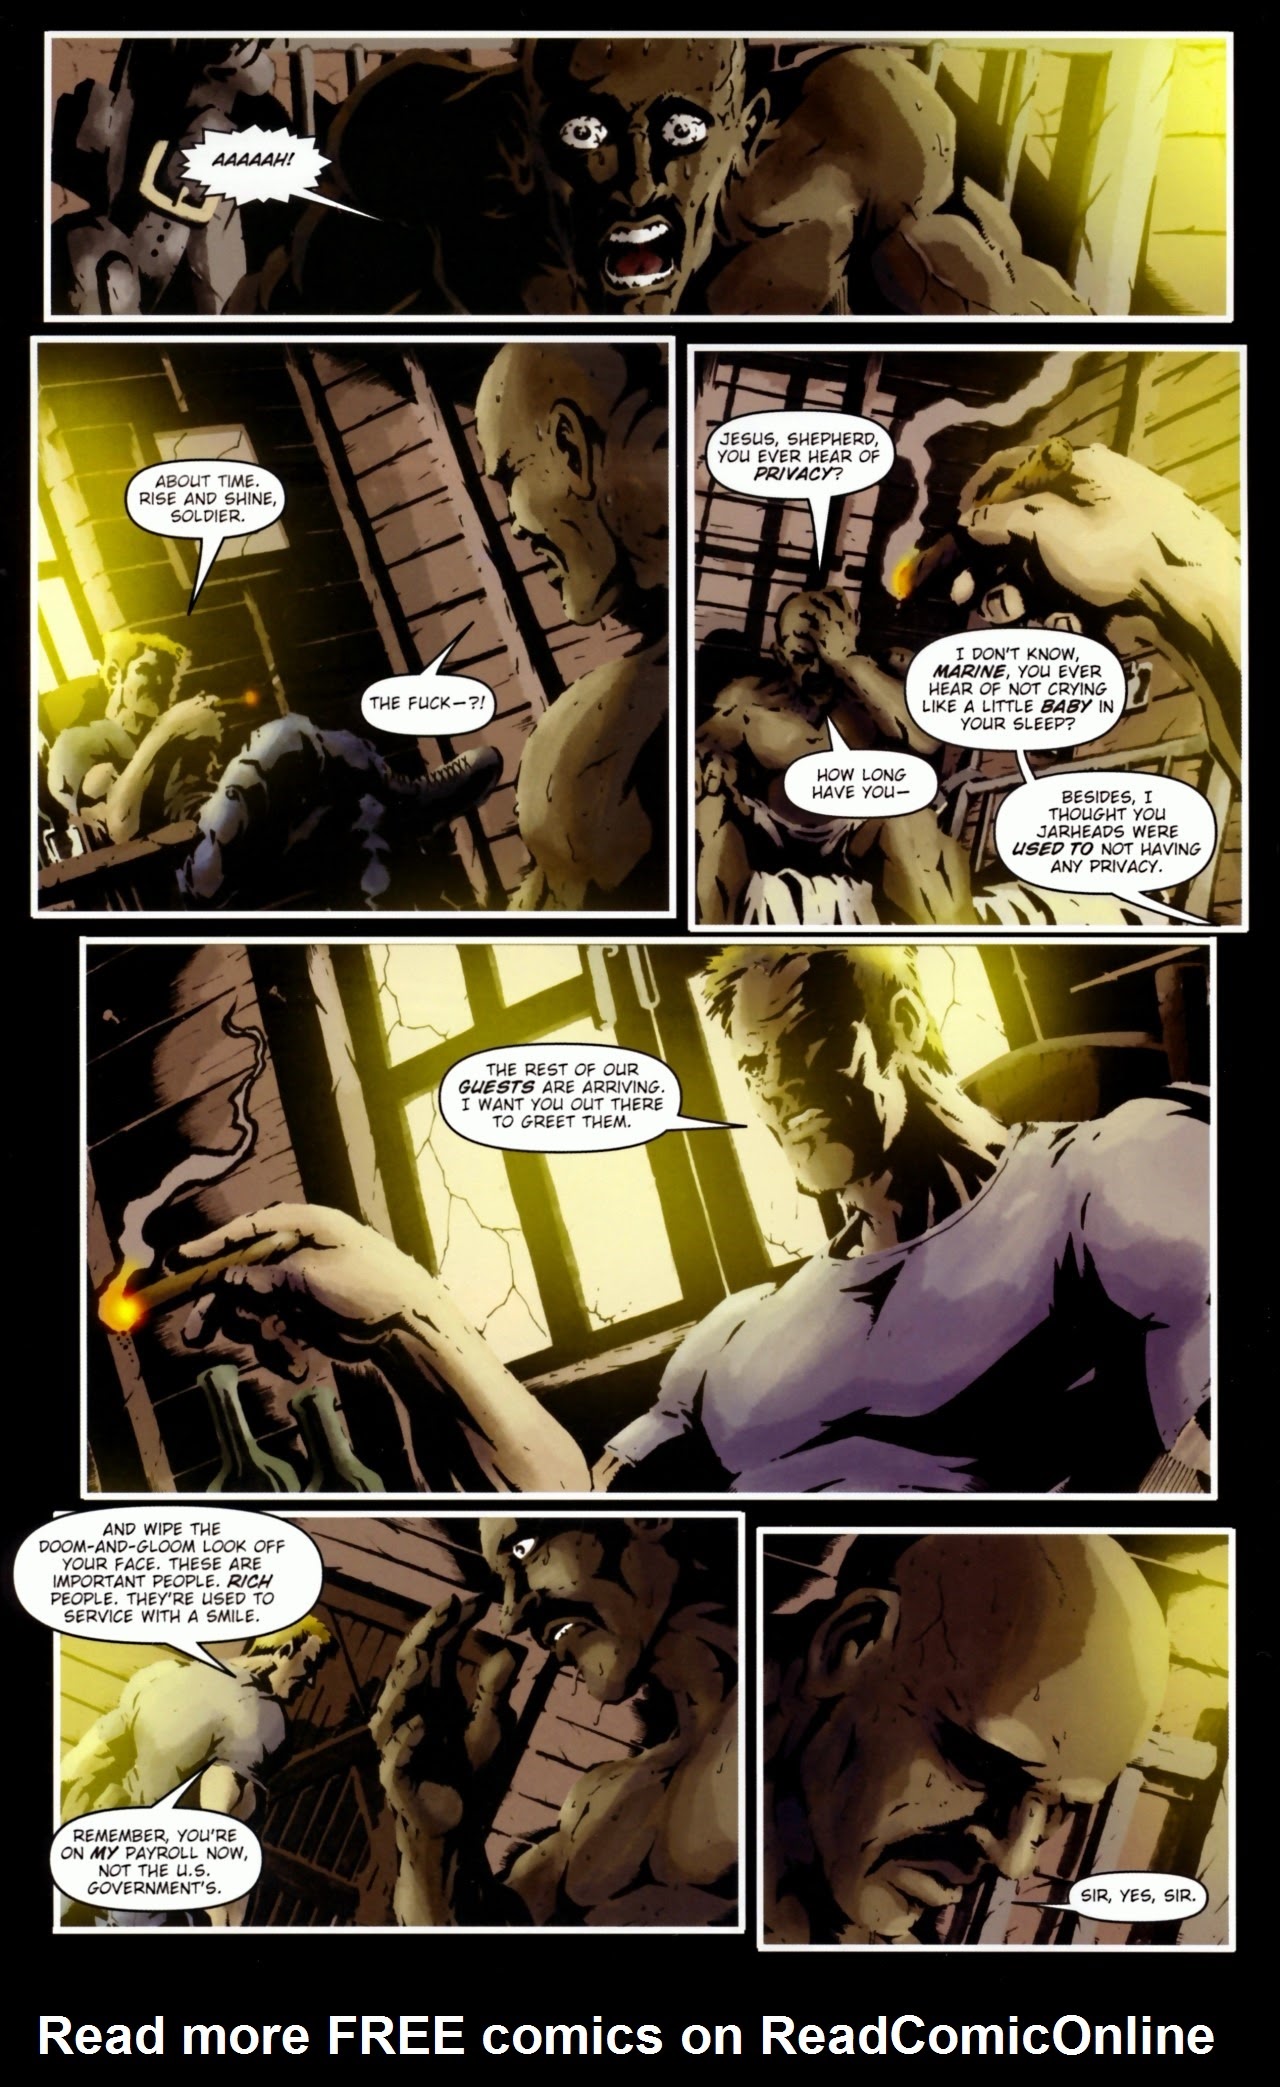 Read online Zombies!: Hunters comic -  Issue # Full - 3